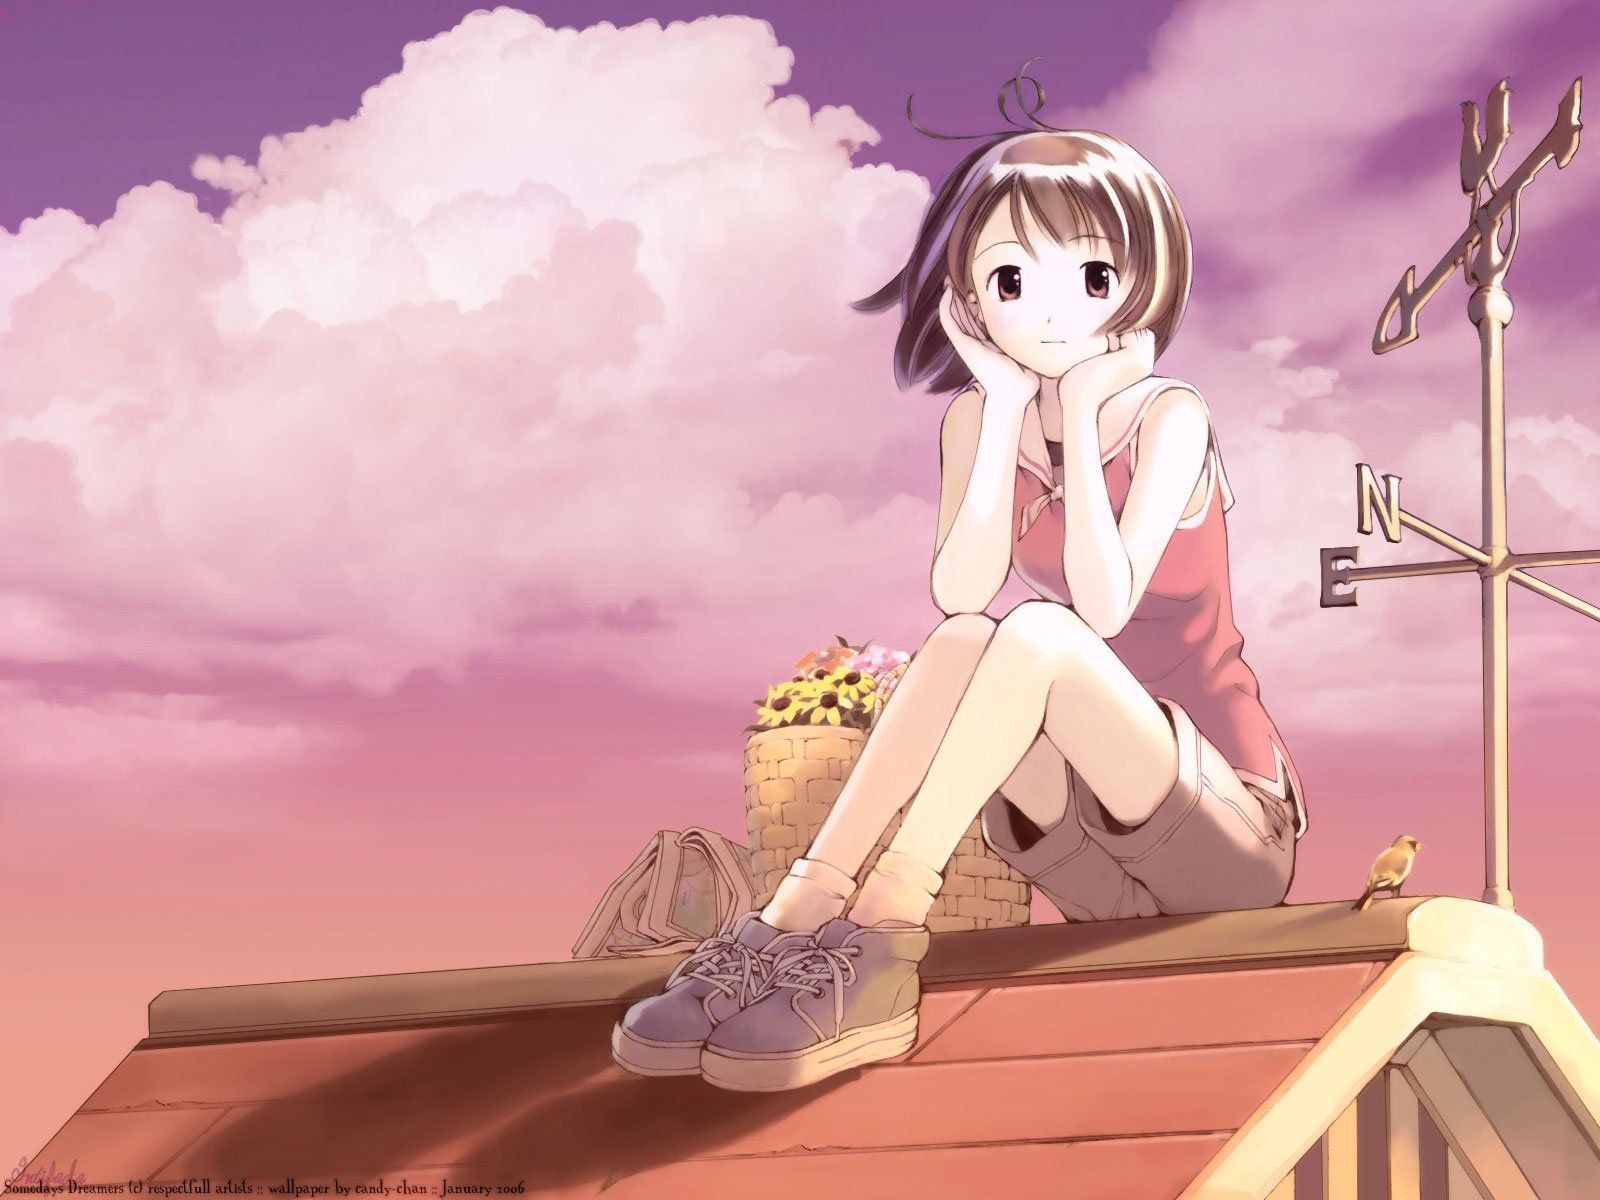 Anime Girl Sitting Alone Wallpapers - Wallpaper Cave
